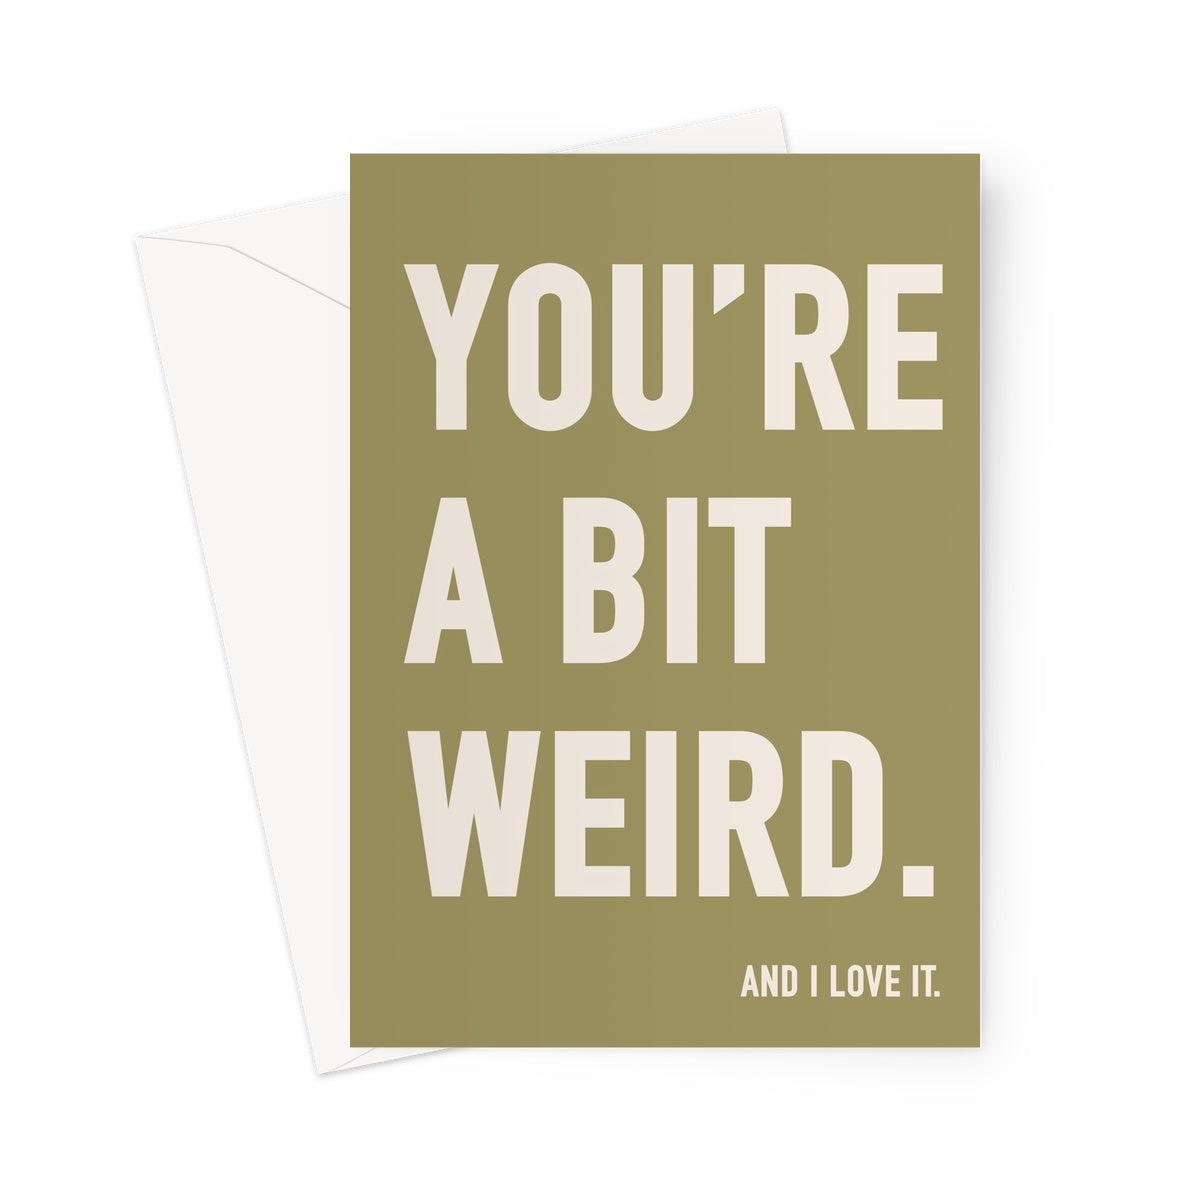 YOU'RE A BIT WEIRD - Olive/Stone Greeting Card